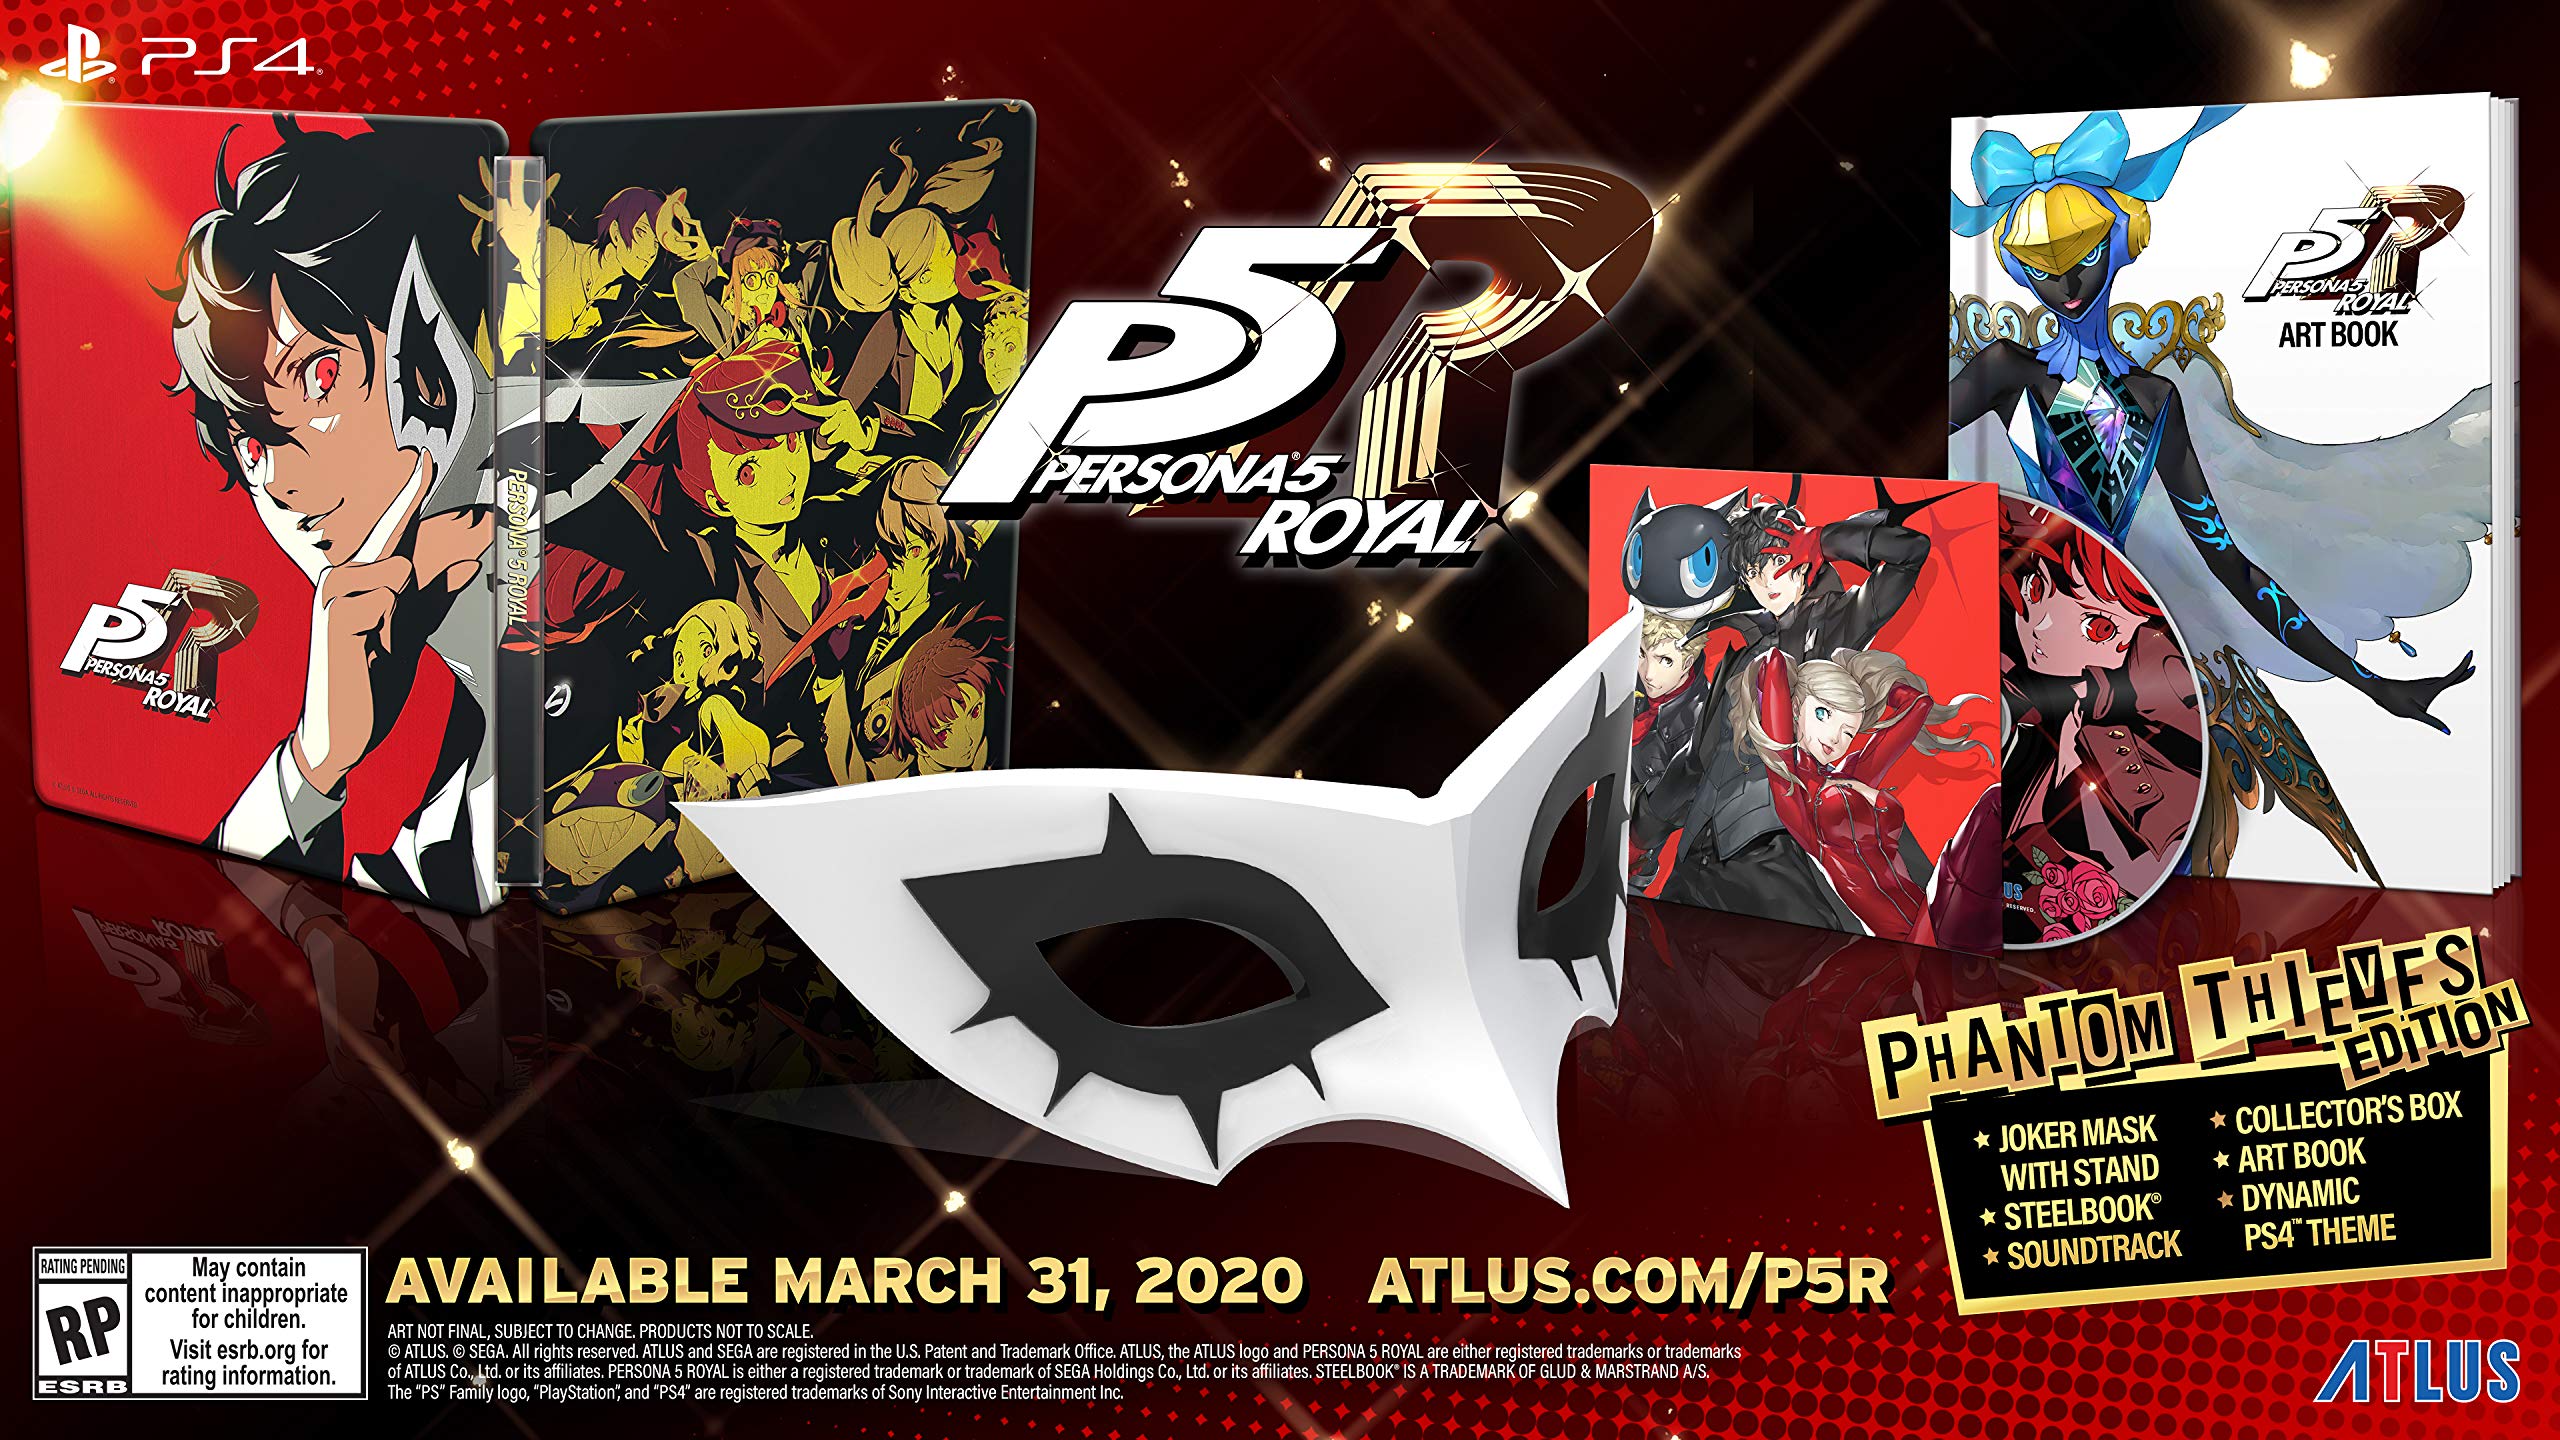 Botanist Absorb Postal code Persona 5 Royal launches March 31, 2020 in the west - Gematsu